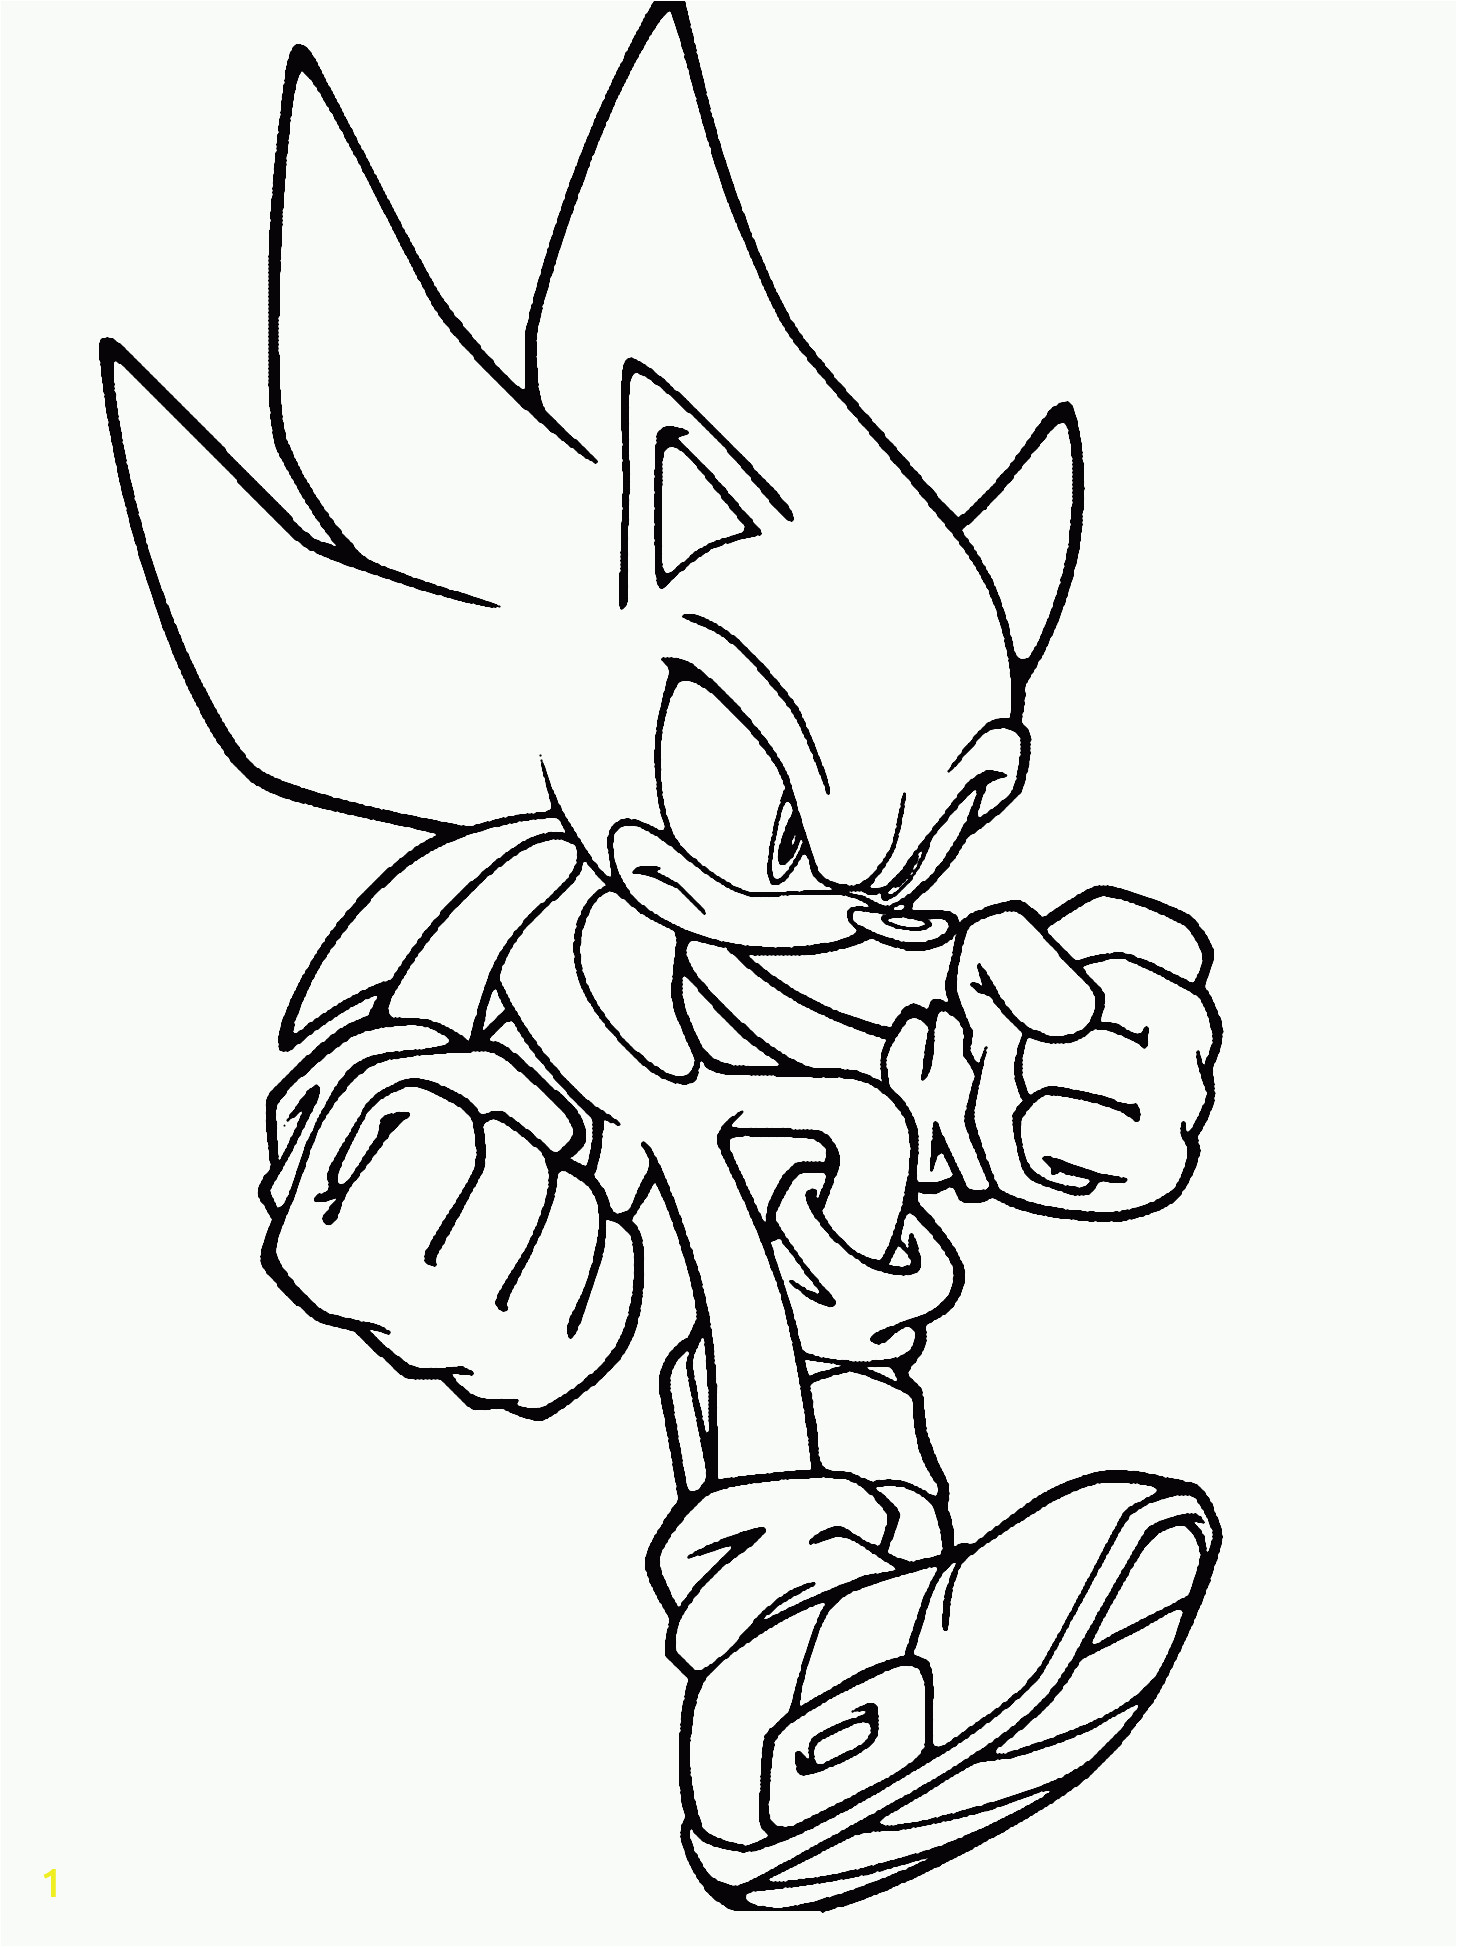 Super sonic sonic the Hedgehog Coloring Pages Super sonic Coloring Page Coloring Home